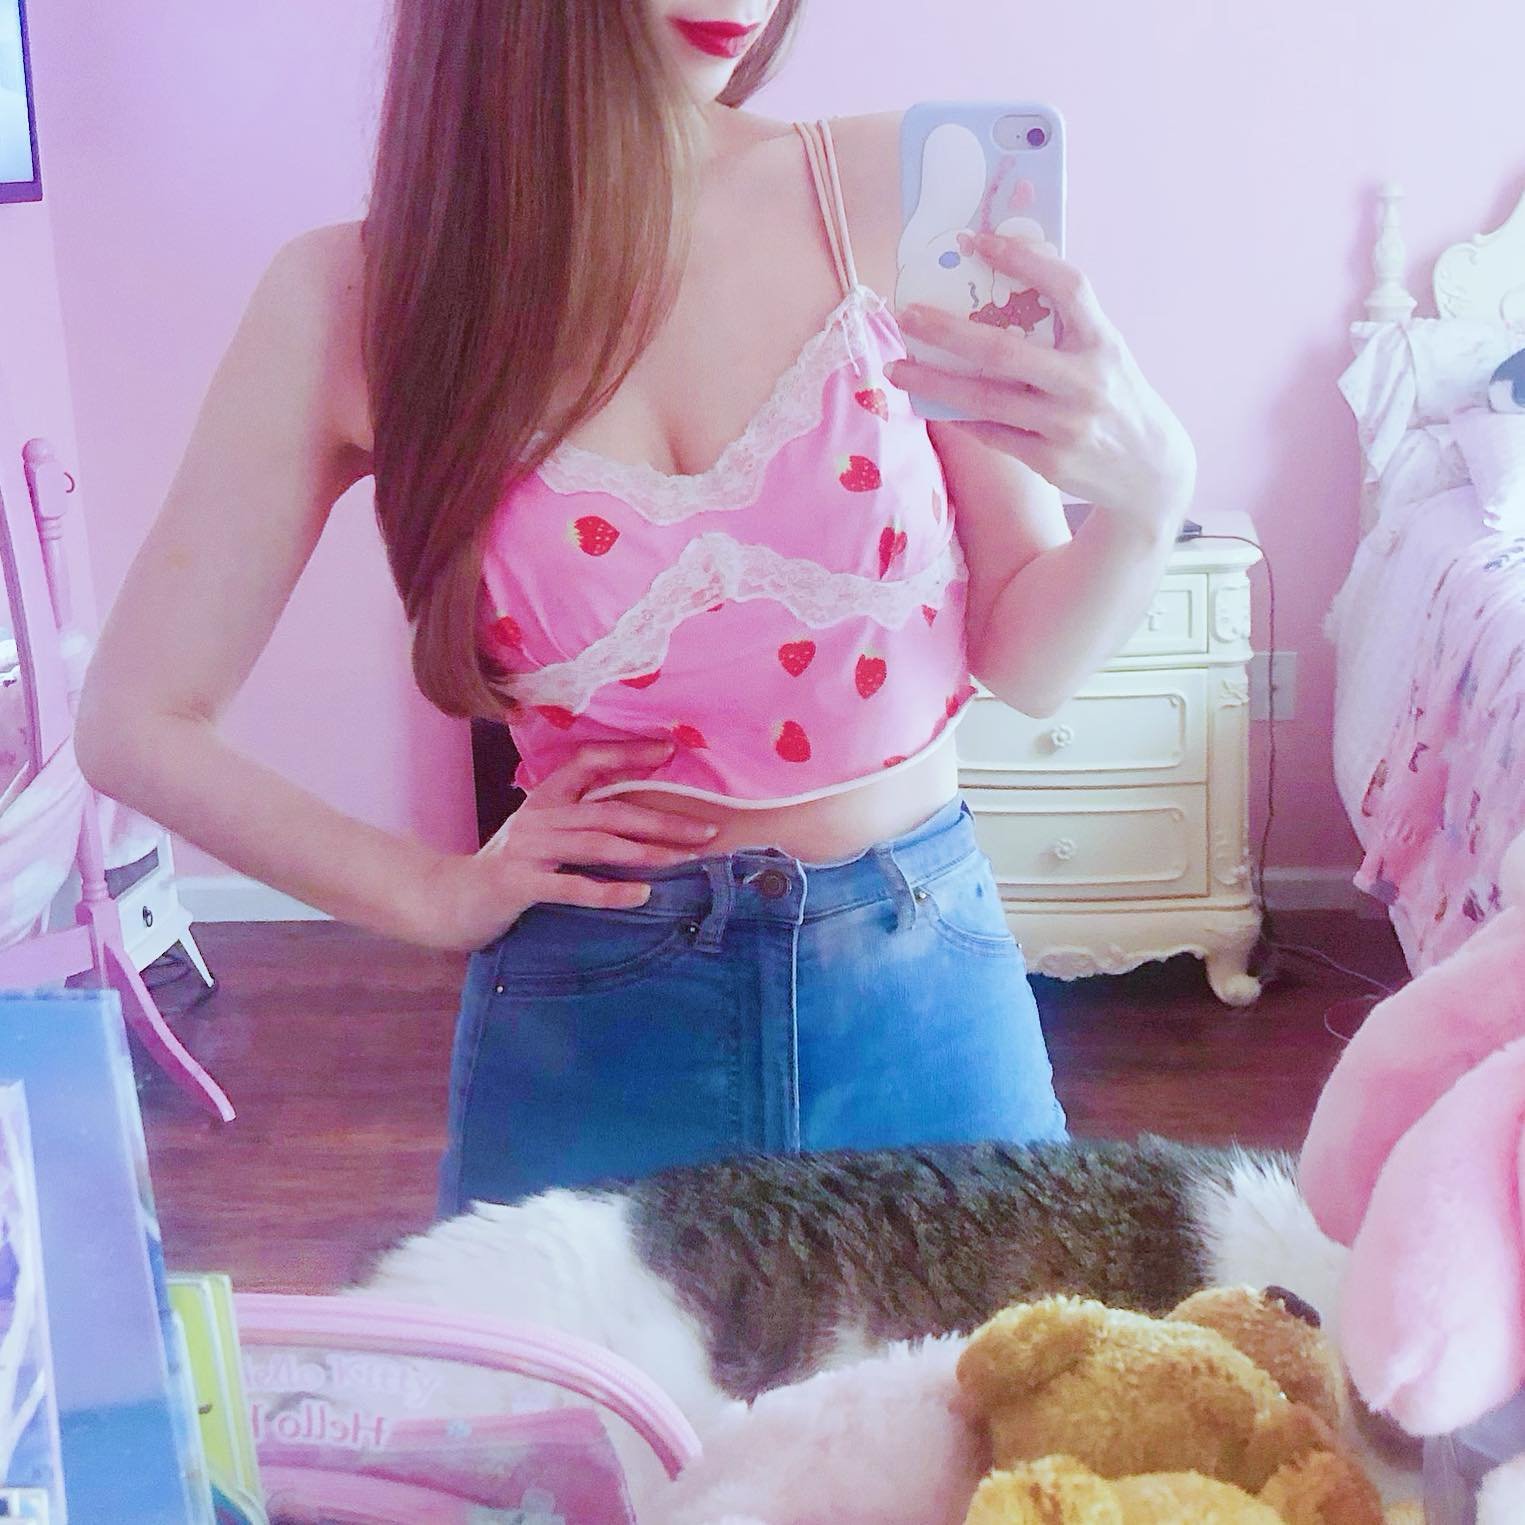 Crop tops that are pink! and have strawberries on it!? Yes, please! I&rsquo;ll always buy them!! 💕🍓💕🍓💕🍓 So cute!
.
#margaritabloom #strawberries #croptop #fashion #kawaiigirl #coquettegirl #fashionstyle #cutetop #strawberrygirl🍓 #cutie #longha